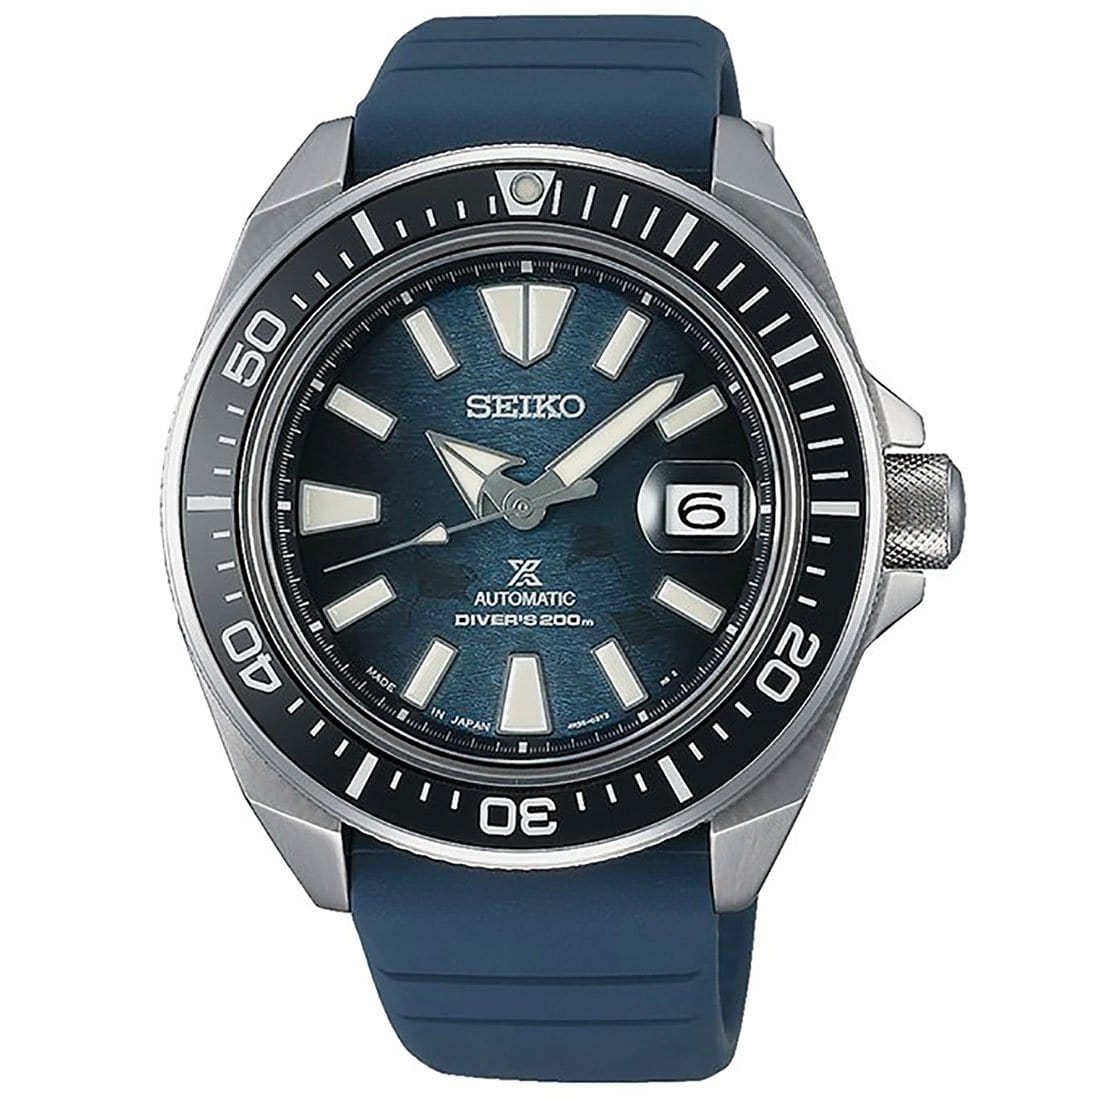 Seiko SBDY081 Prospex Manta Ray Save the Ocean Special Edition JDM Watch